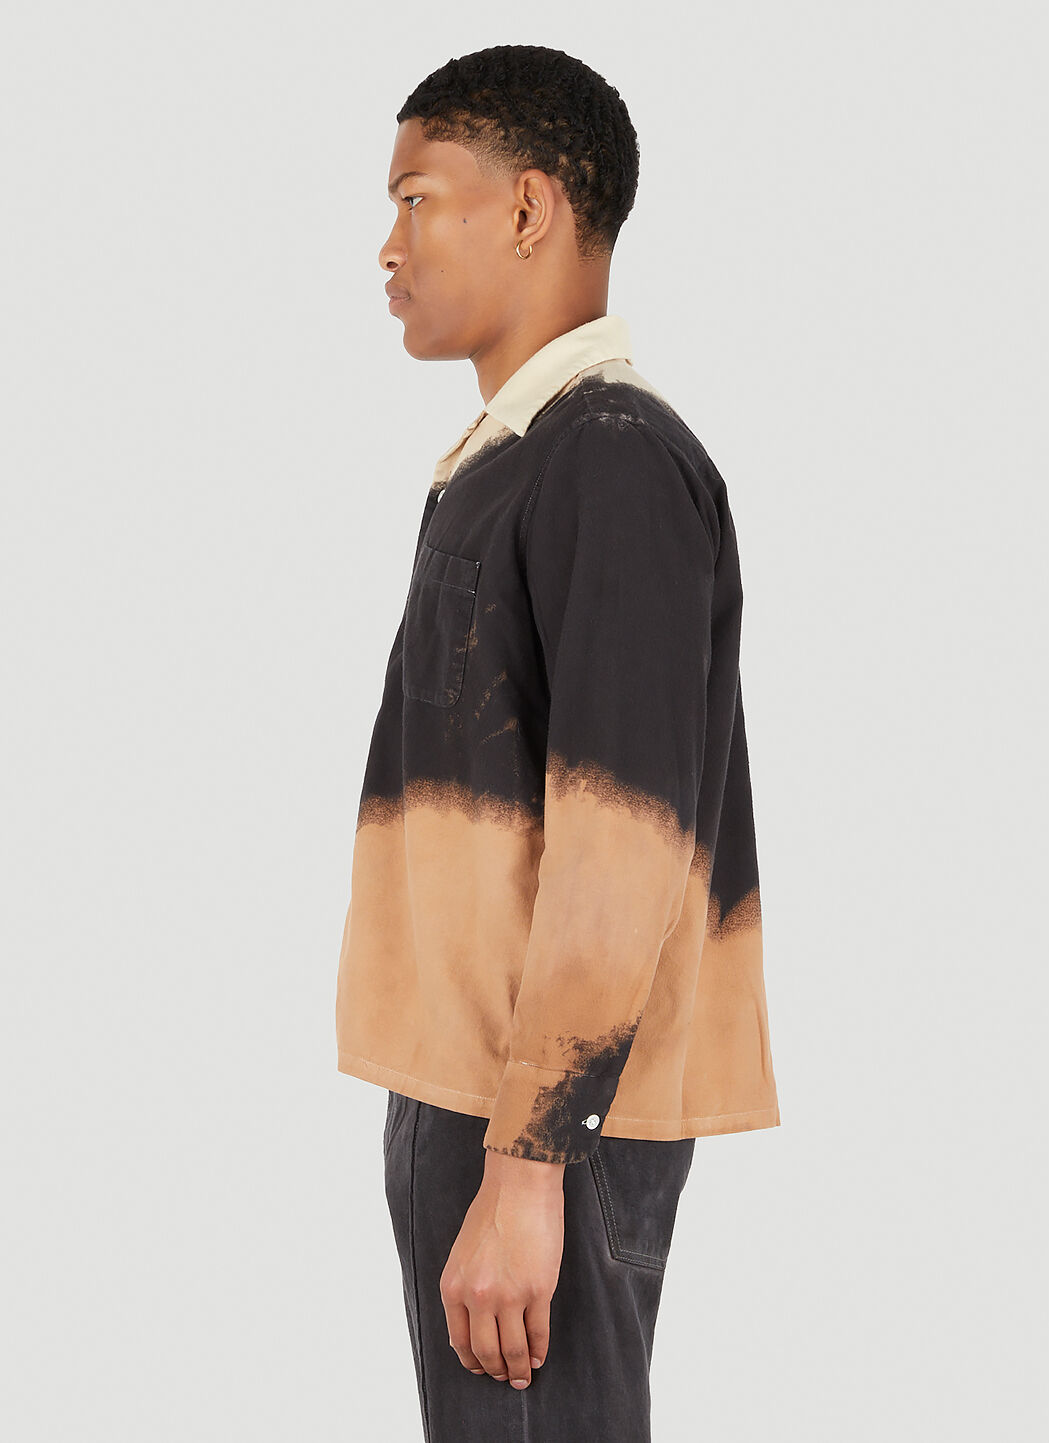 NOMA t.d. Hand Dyed Shirt in Black | LN-CC®